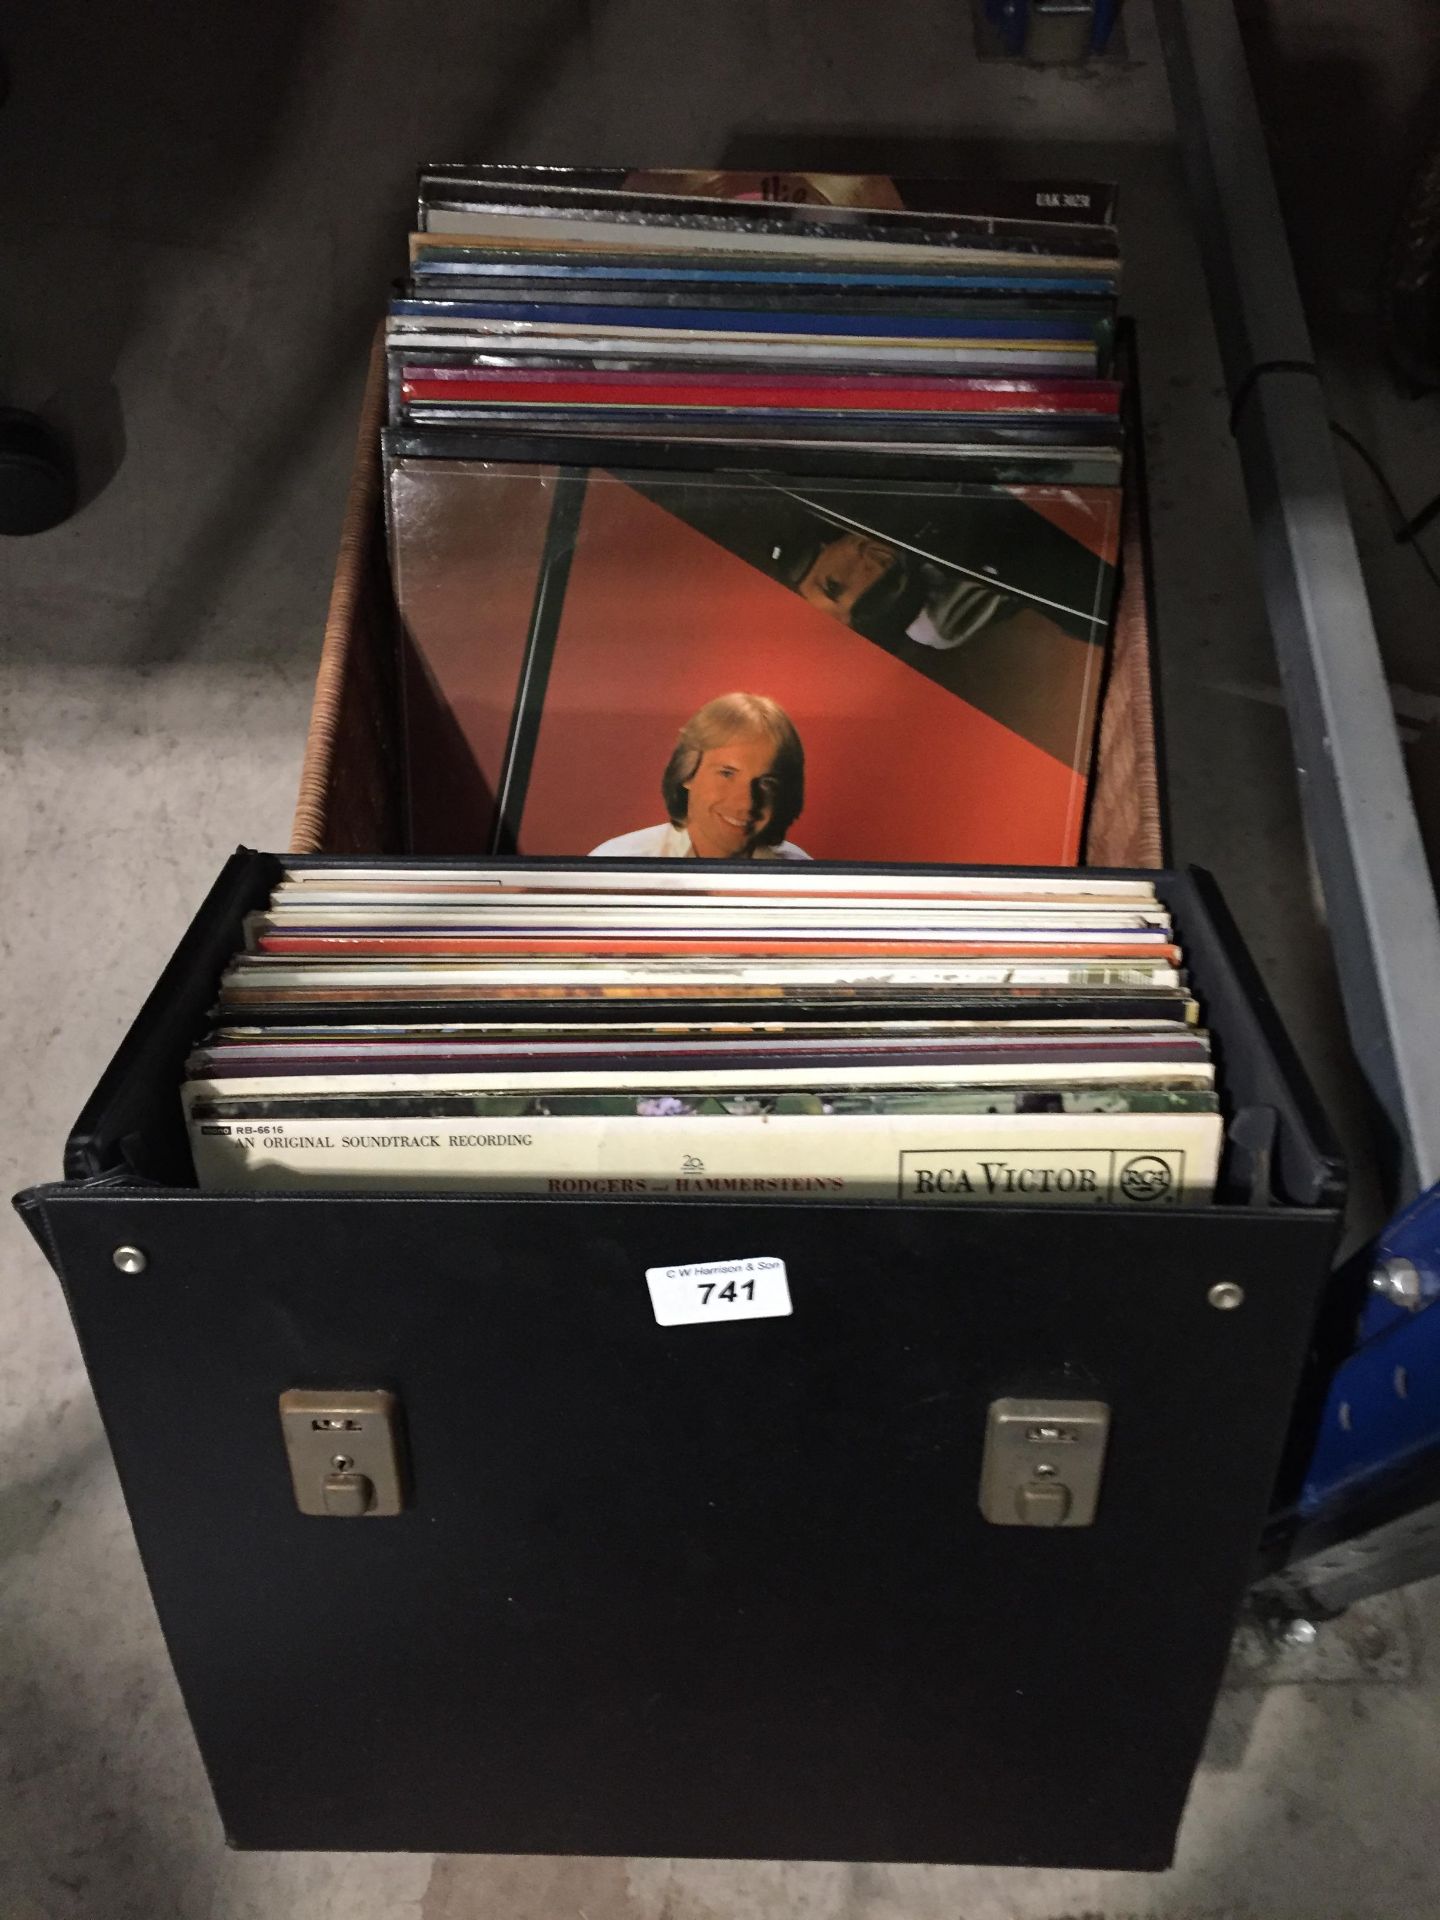 Record case & basket containing 60+ LPs